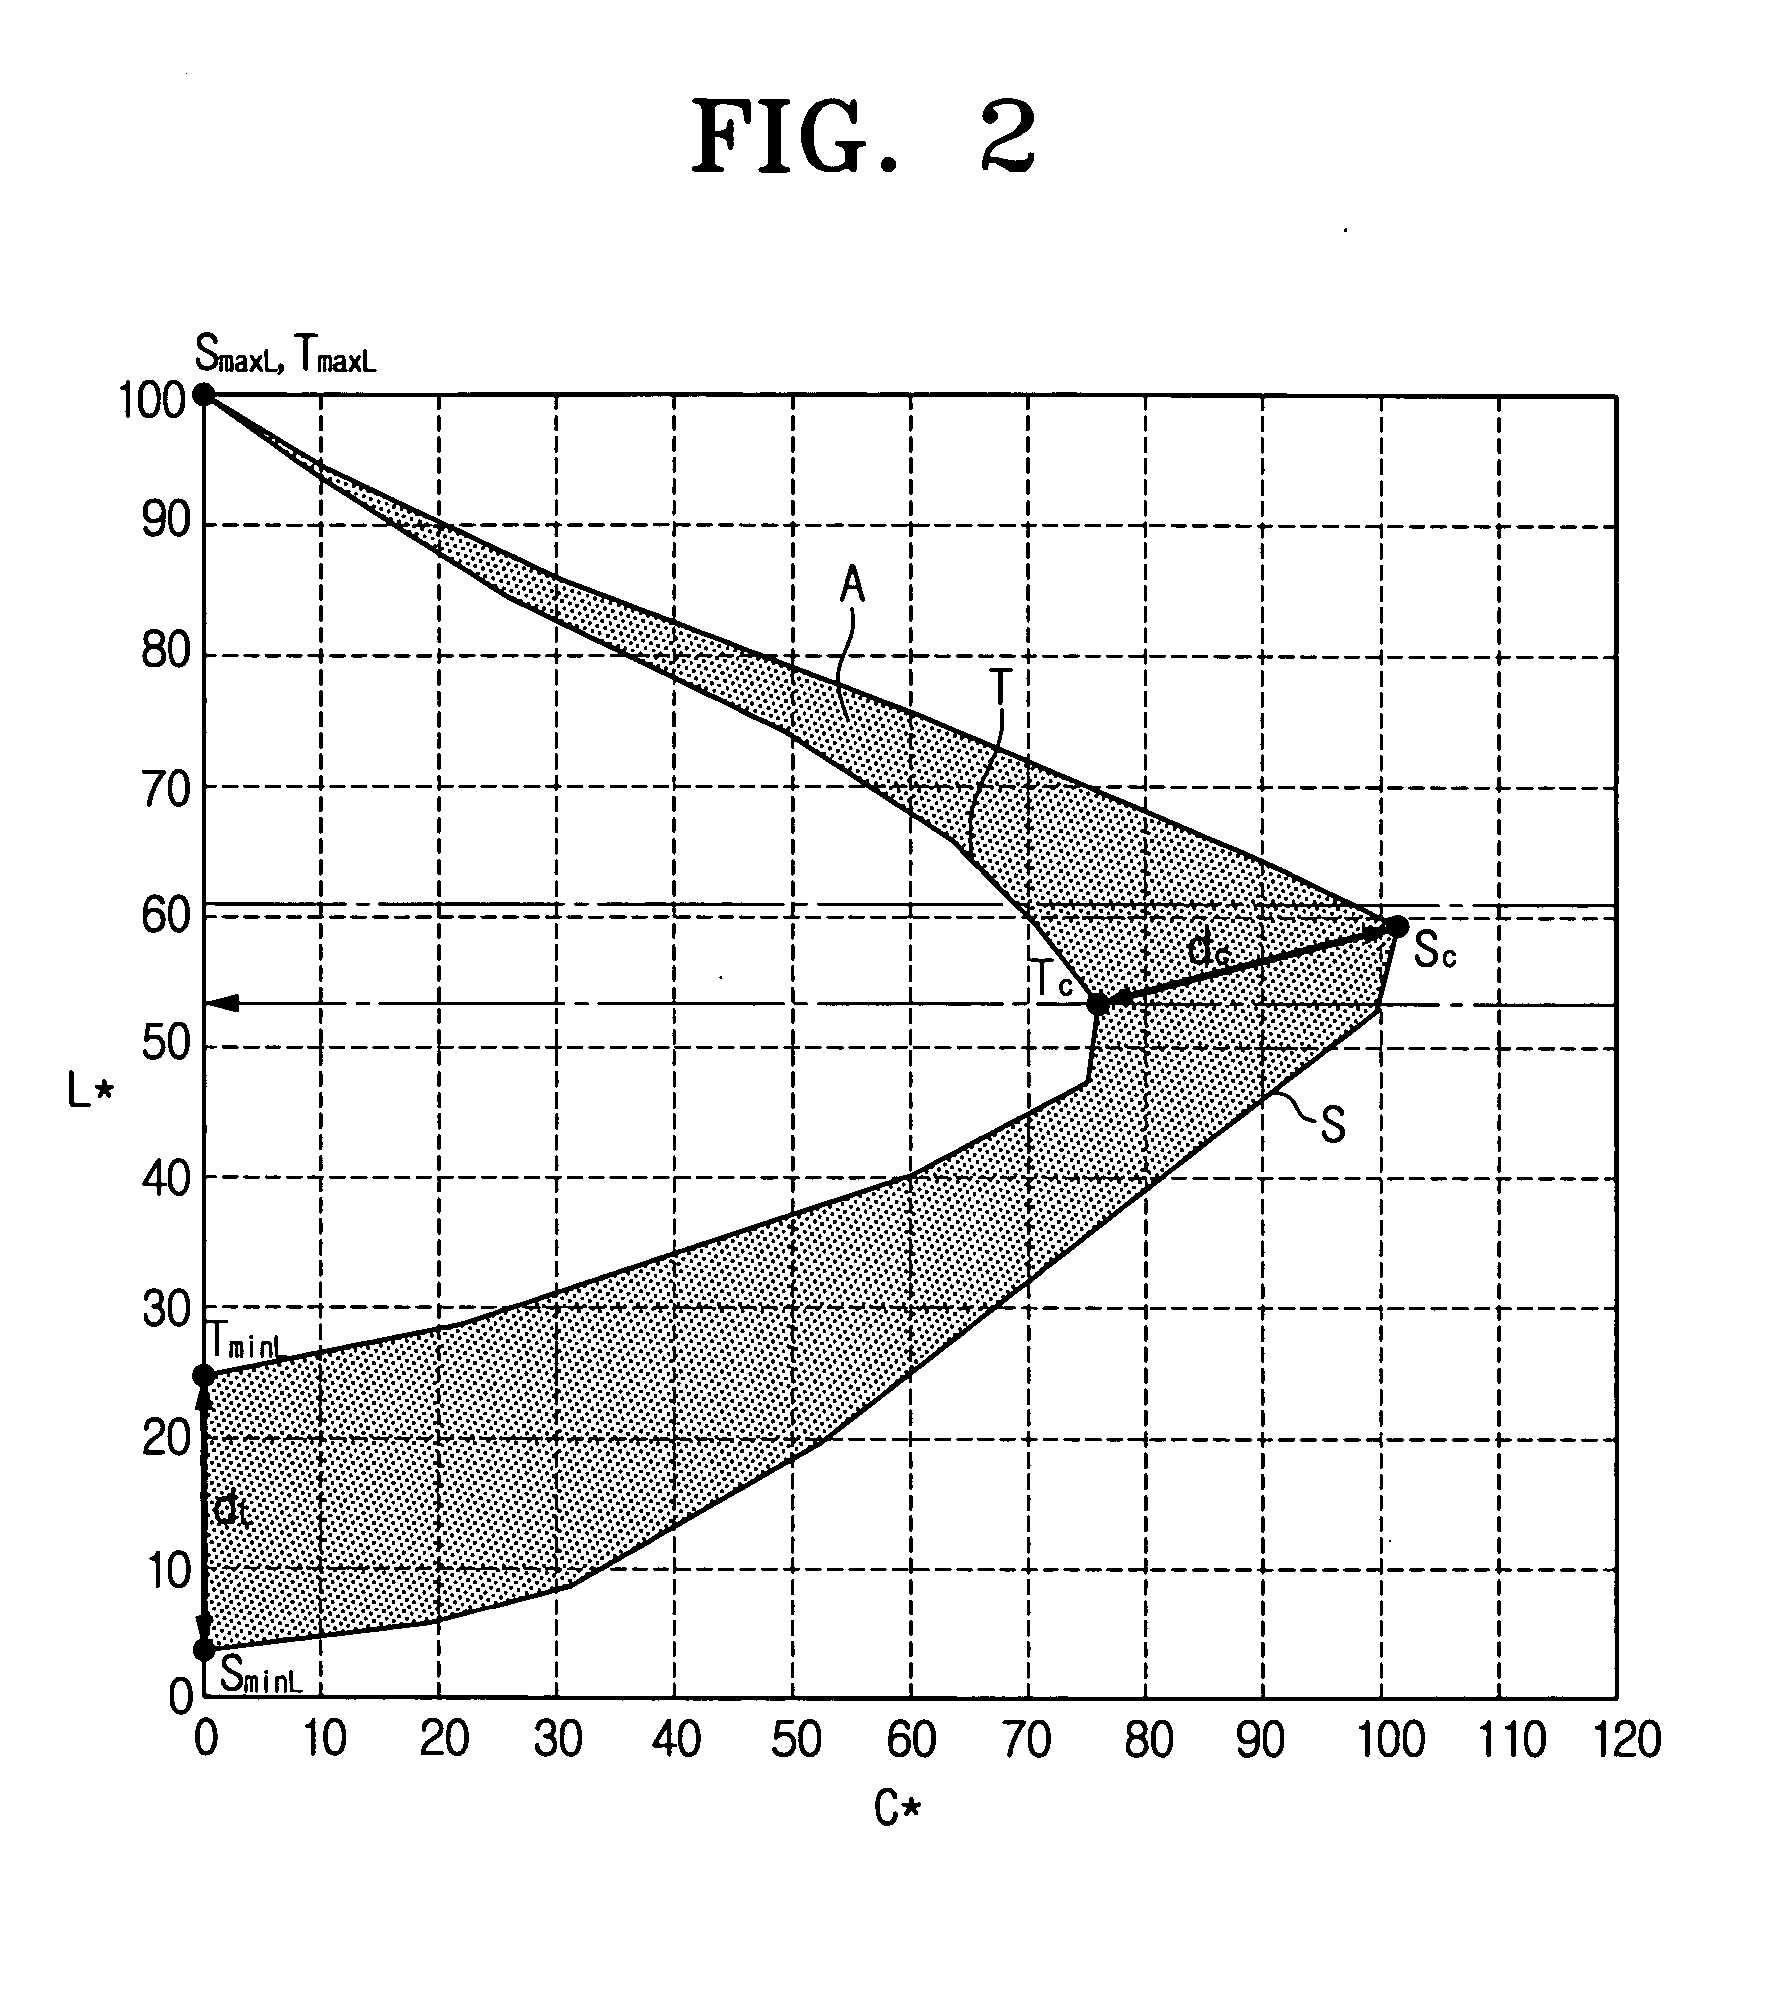 Gamut mapping apparatus and method thereof